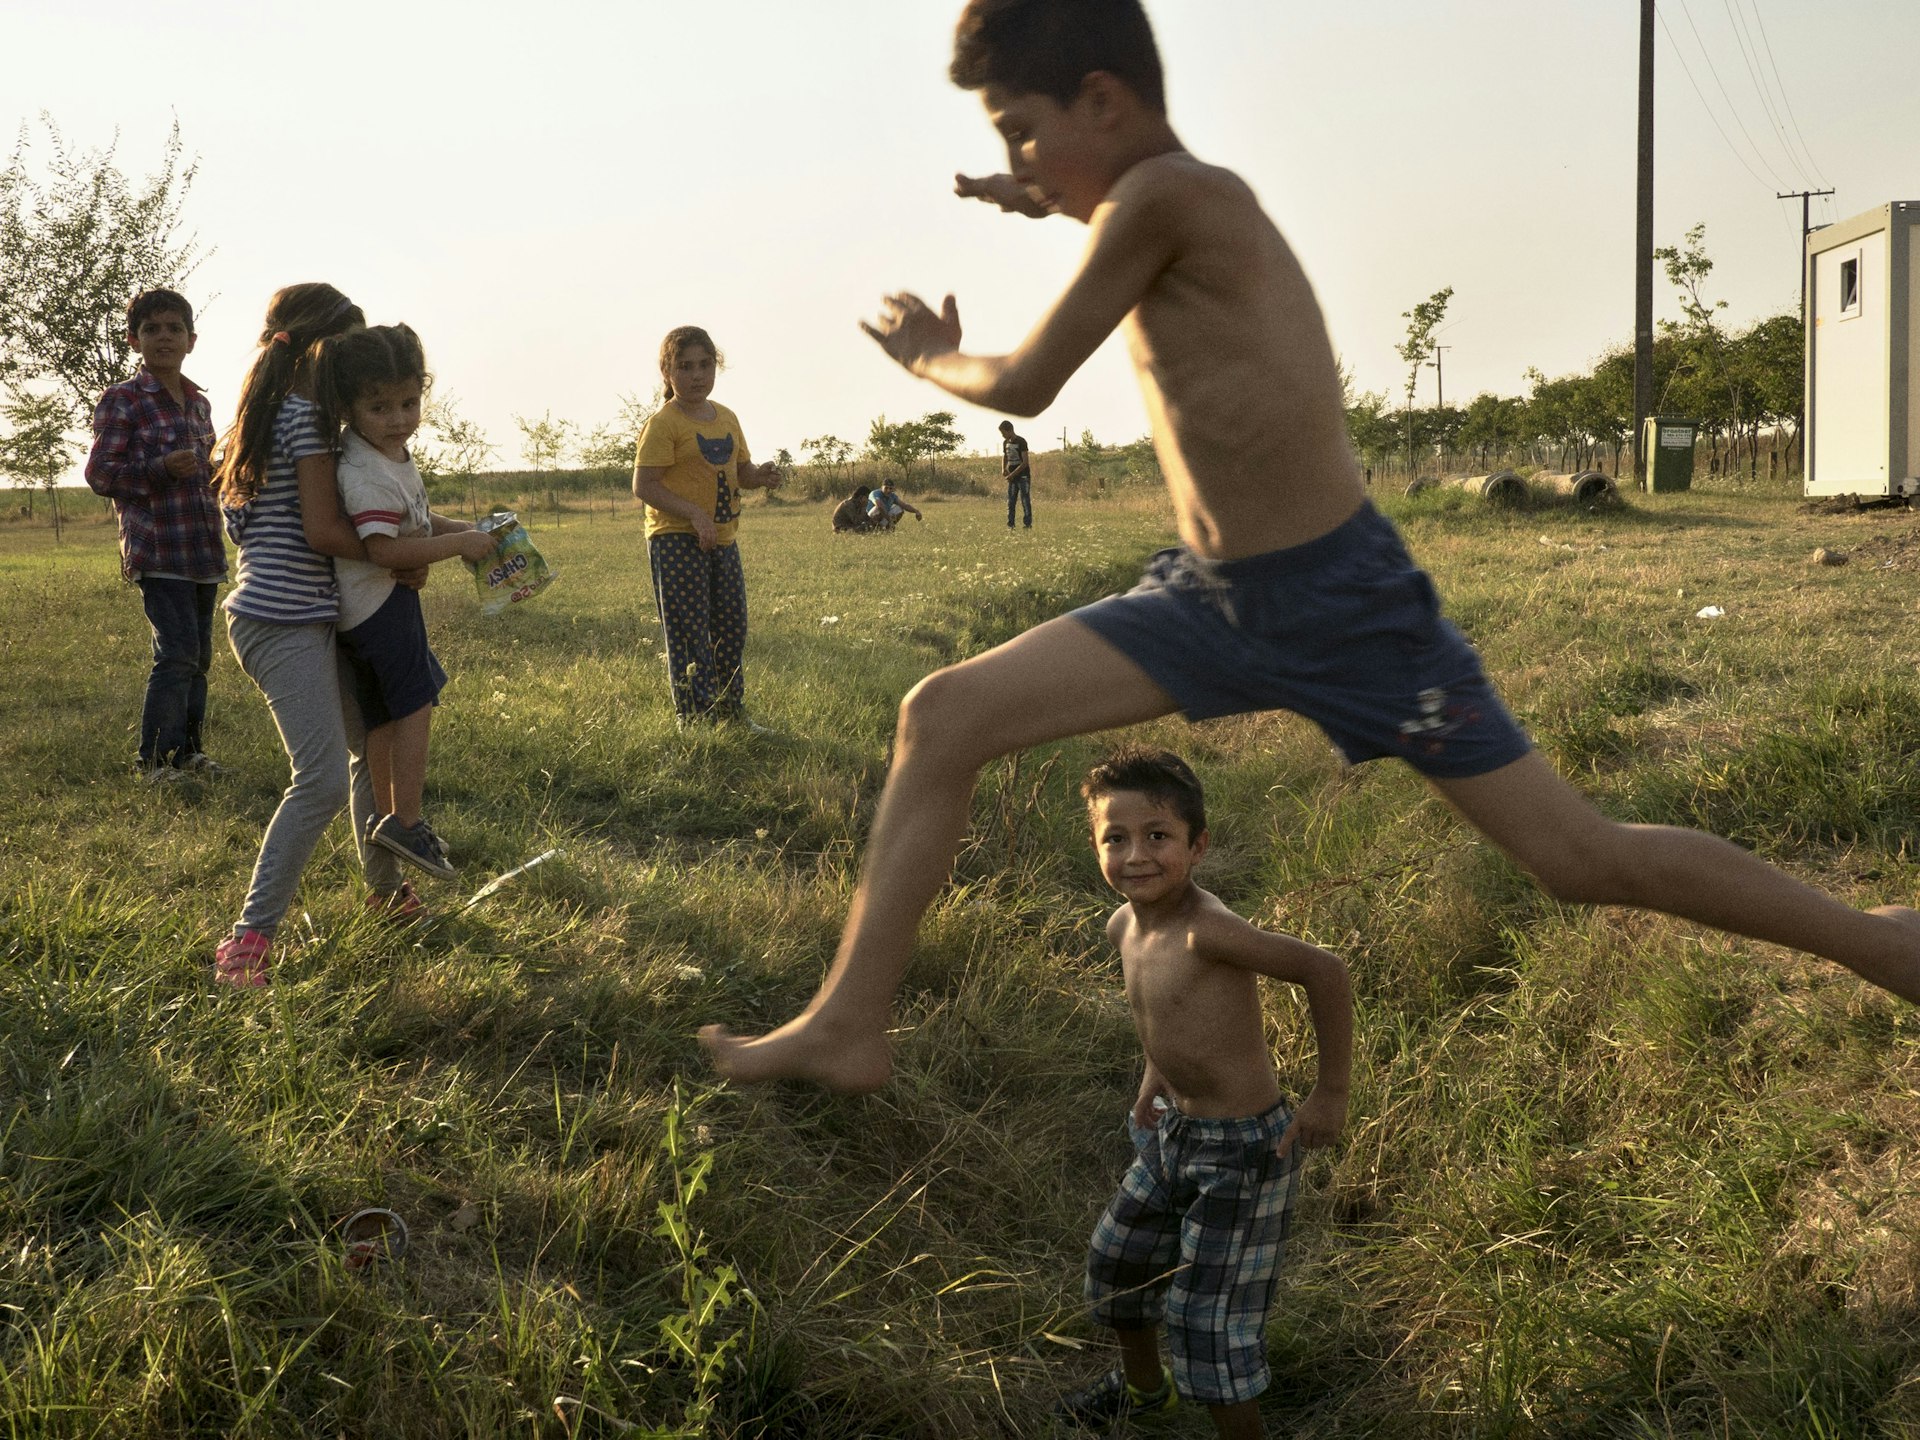 Syrian families, mostly from Aleppo, are placed in a refugee camp in Vasariste near the Serbian- Hungarian border. After a day to recover, they will walk and attempt to cross the Serbian-Hungarian  get to Serbia, the last country that stands between them and a European Union member state, Hungary. SERBIA. Vasariste. August 12, 2015 © Jerome Sessini